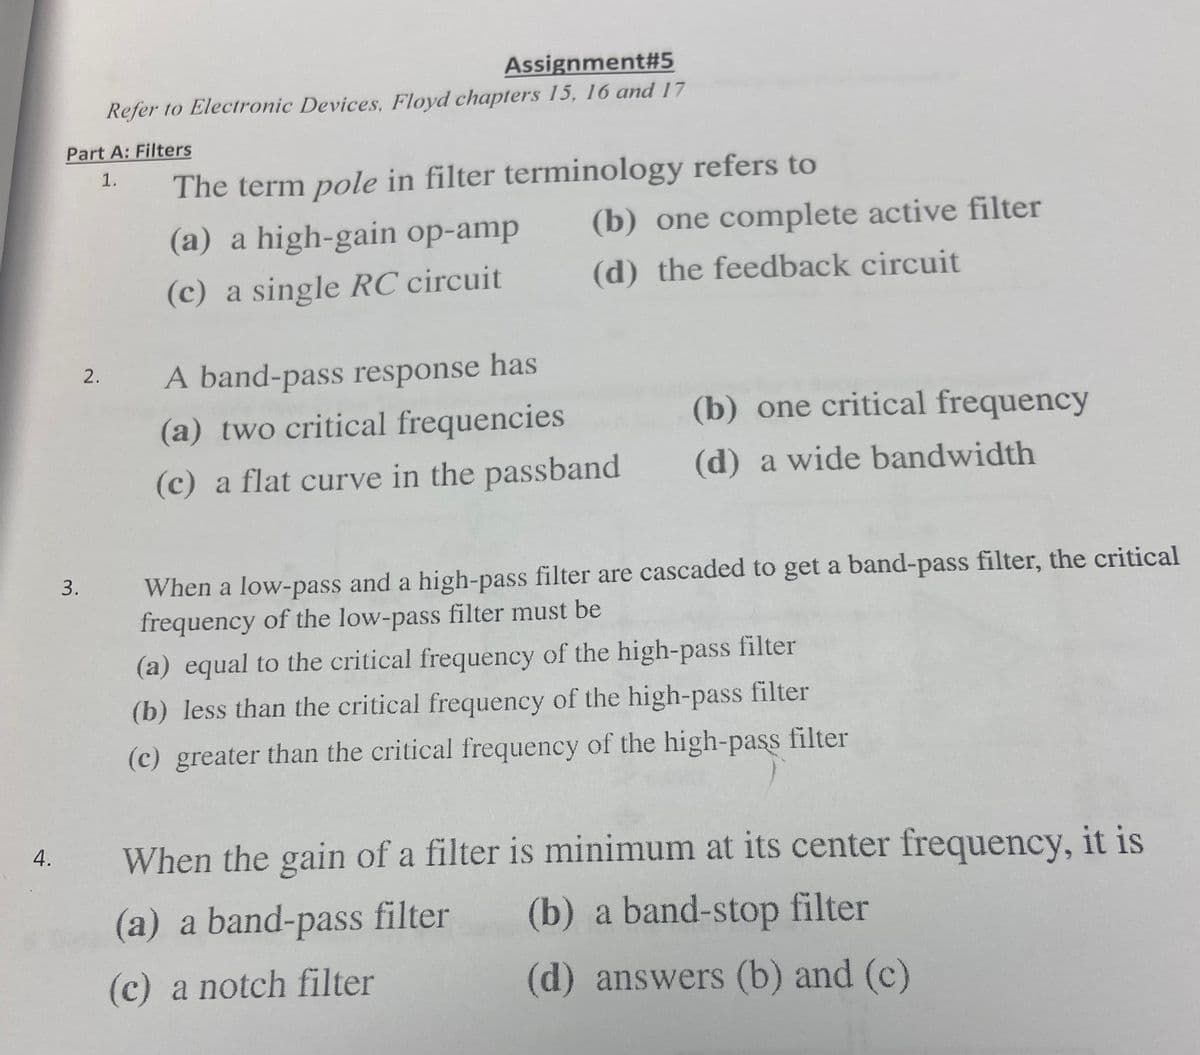 4.
Part A: Filters
1.
3.
Assignment#5
Refer to Electronic Devices, Floyd chapters 15, 16 and 17
2.
The term pole in filter terminology refers to
(a) a high-gain op-amp
(c) a single RC circuit
(b) one complete active filter
(d) the feedback circuit
A band-pass response has
(a) two critical frequencies
(c) a flat curve in the passband
(b) one critical frequency
(d) a wide bandwidth
When a low-pass and a high-pass filter are cascaded to get a band-pass filter, the critical
frequency of the low-pass filter must be
(a) equal to the critical frequency of the high-pass filter
(b) less than the critical frequency of the high-pass filter
(c) greater than the critical frequency of the high-pass filter
When the gain of a filter is minimum at its center frequency, it is
(a) a band-pass filter
(b) a band-stop filter
(c) a notch filter
(d) answers (b) and (c)